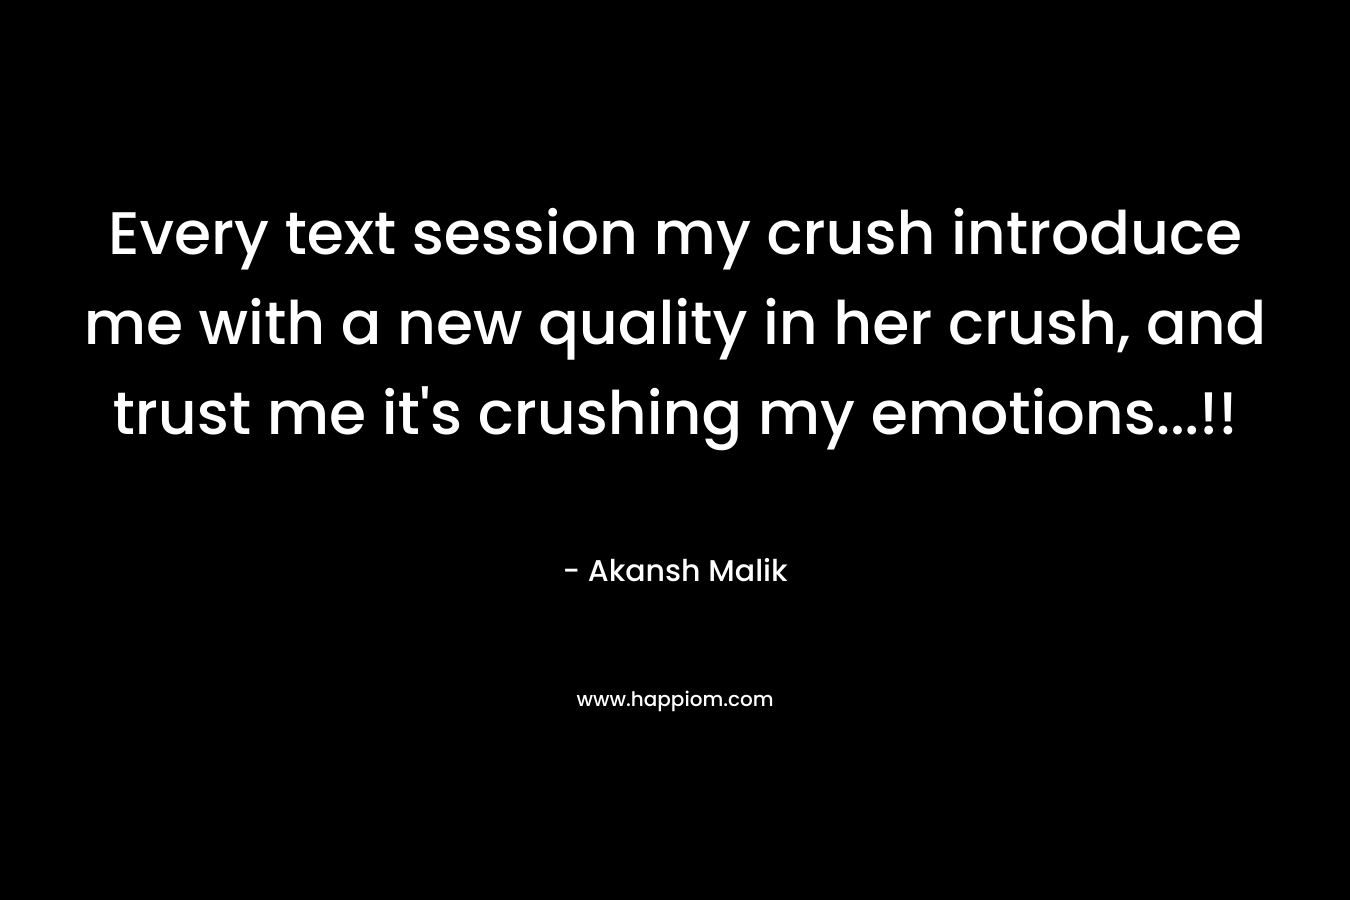 Every text session my crush introduce me with a new quality in her crush, and trust me it’s crushing my emotions…!! – Akansh Malik